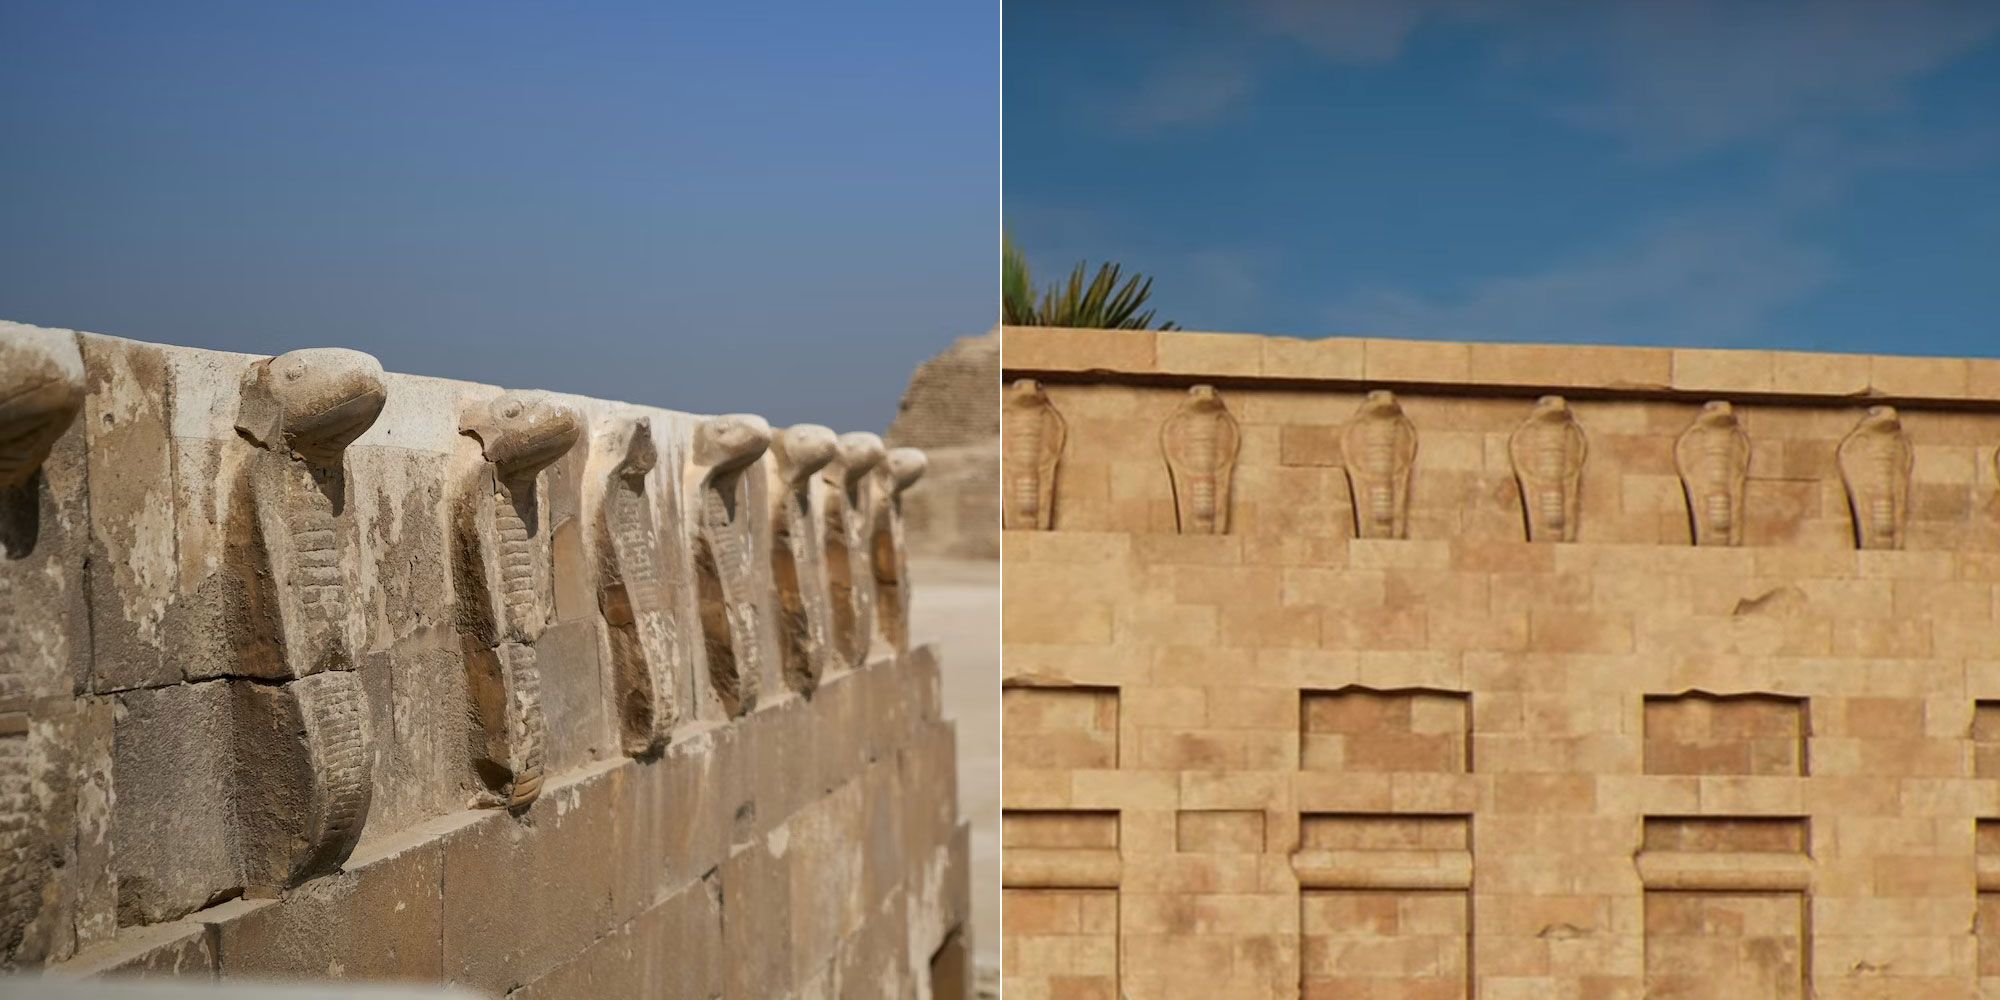 Cobra Friezes By The Pyramid of Djoser in Assassin's Creed 2.